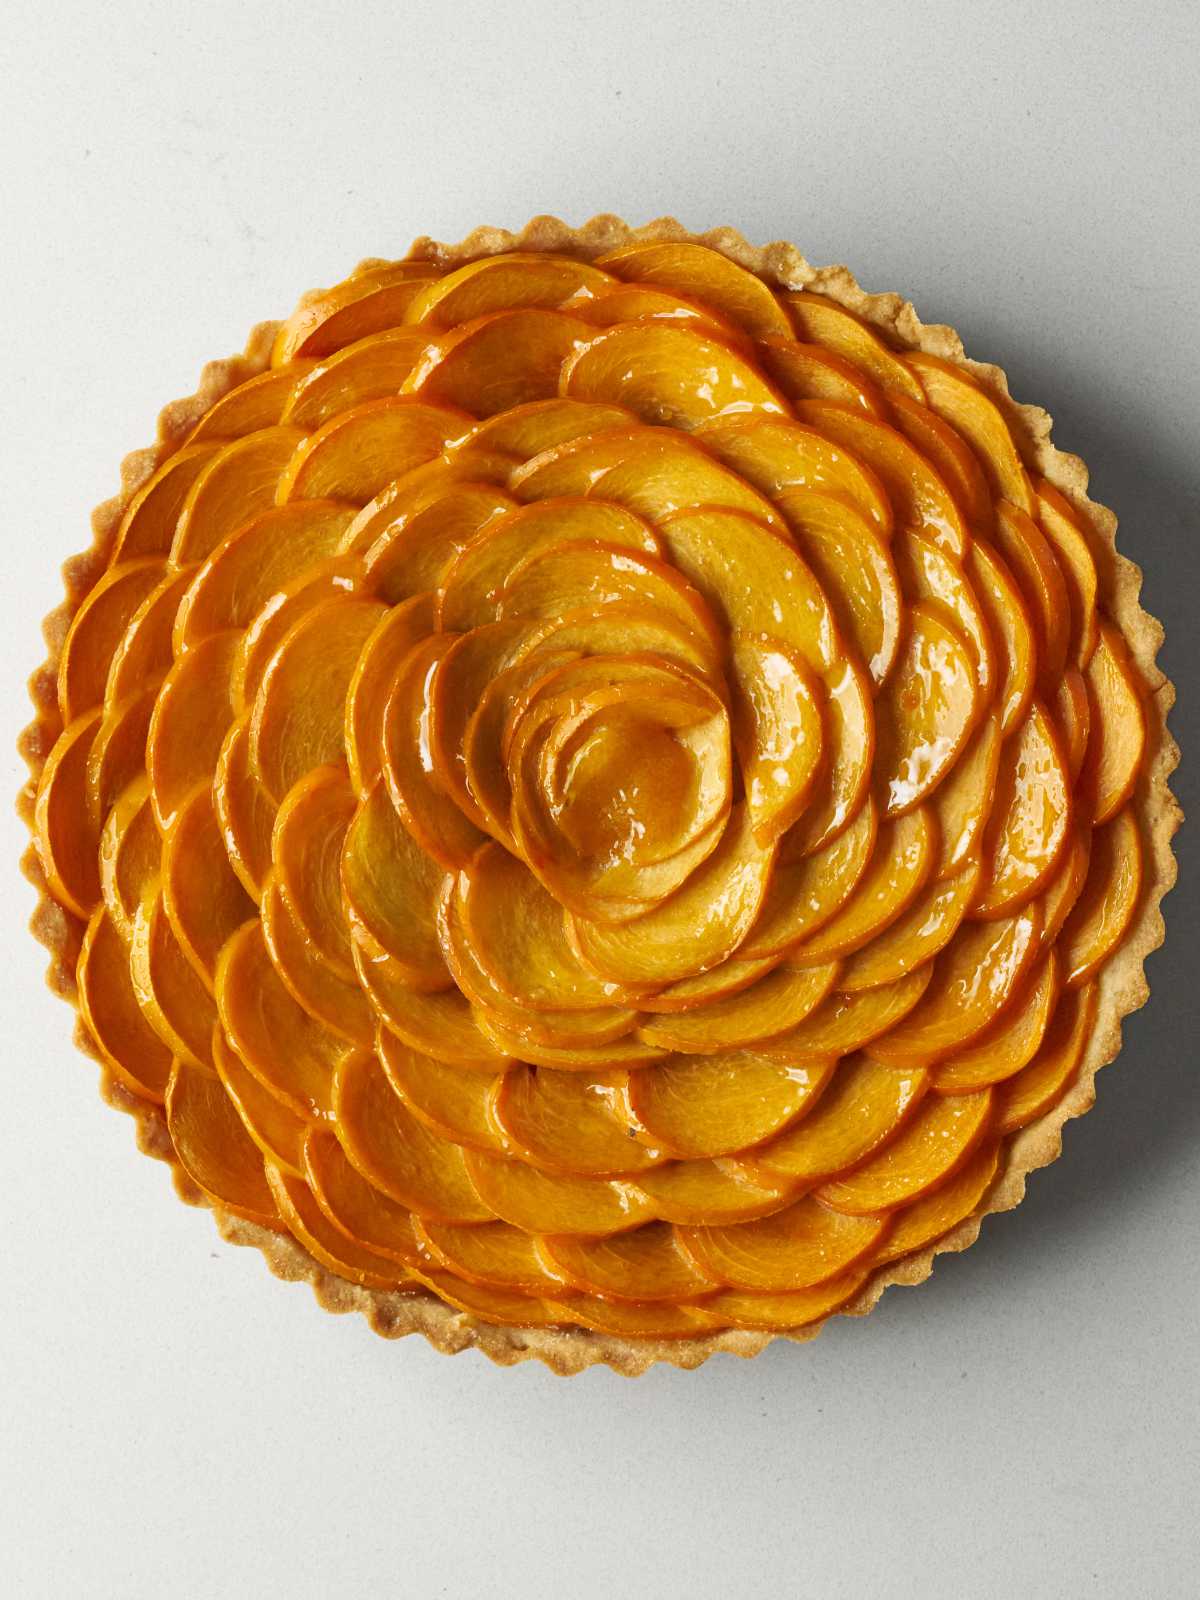 Persimmon arranged in a rose pattern with a dollop of orange jam in the center.